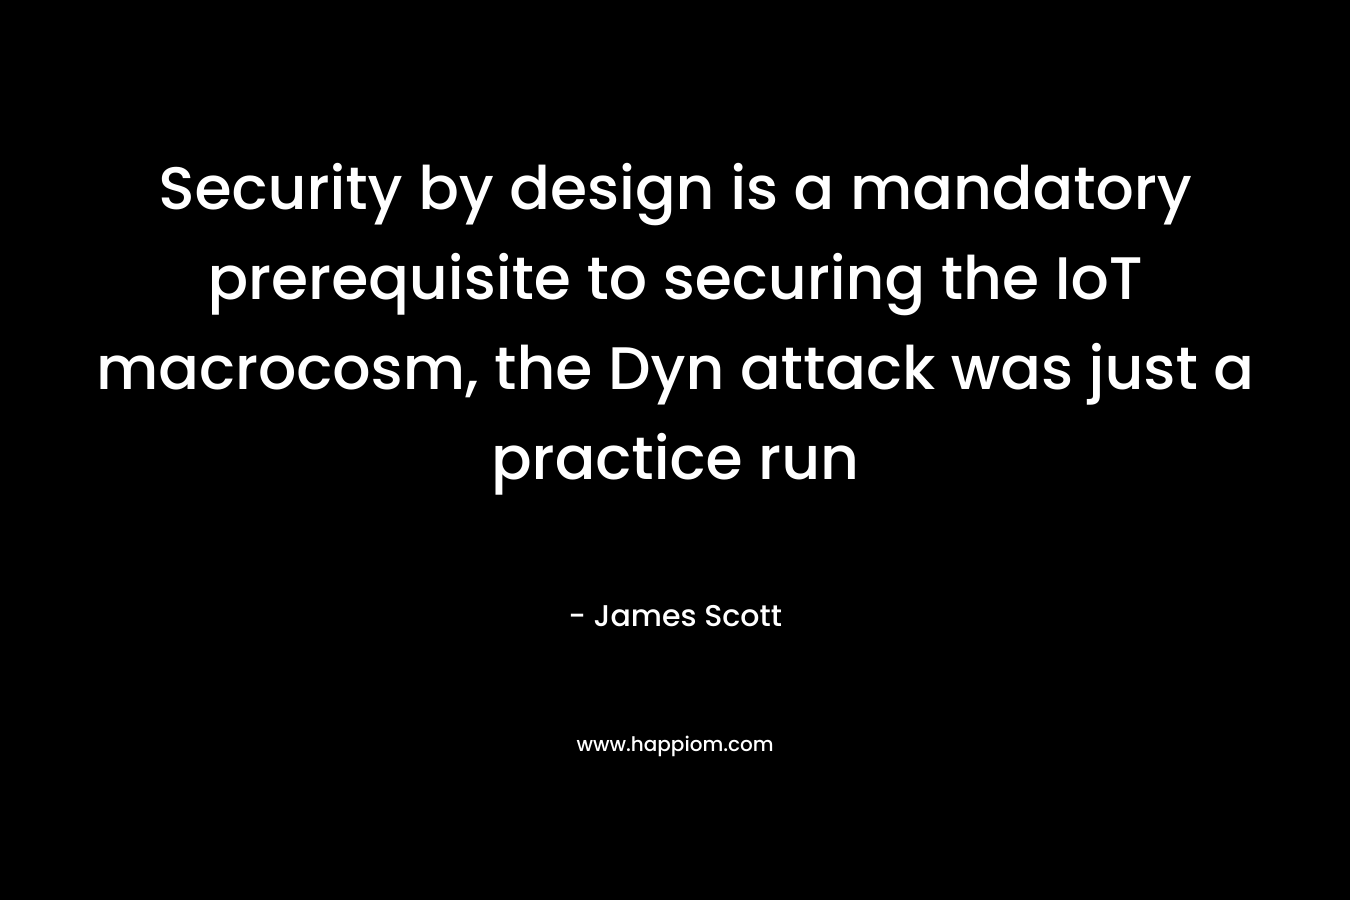 Security by design is a mandatory prerequisite to securing the IoT macrocosm, the Dyn attack was just a practice run – James Scott